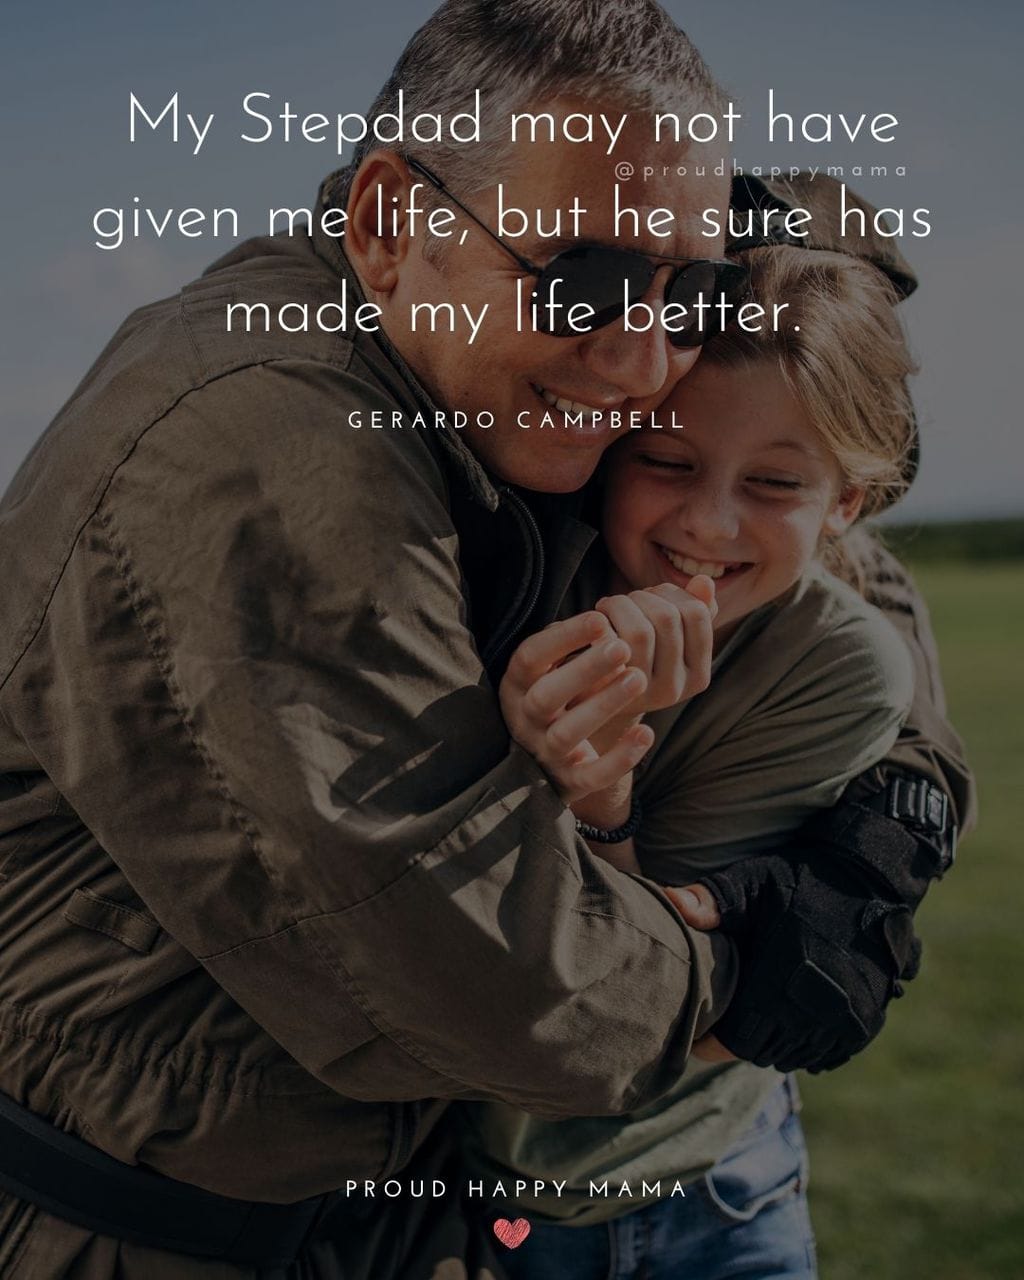 40+ Step Dad Quotes To Share With Your Stepdad